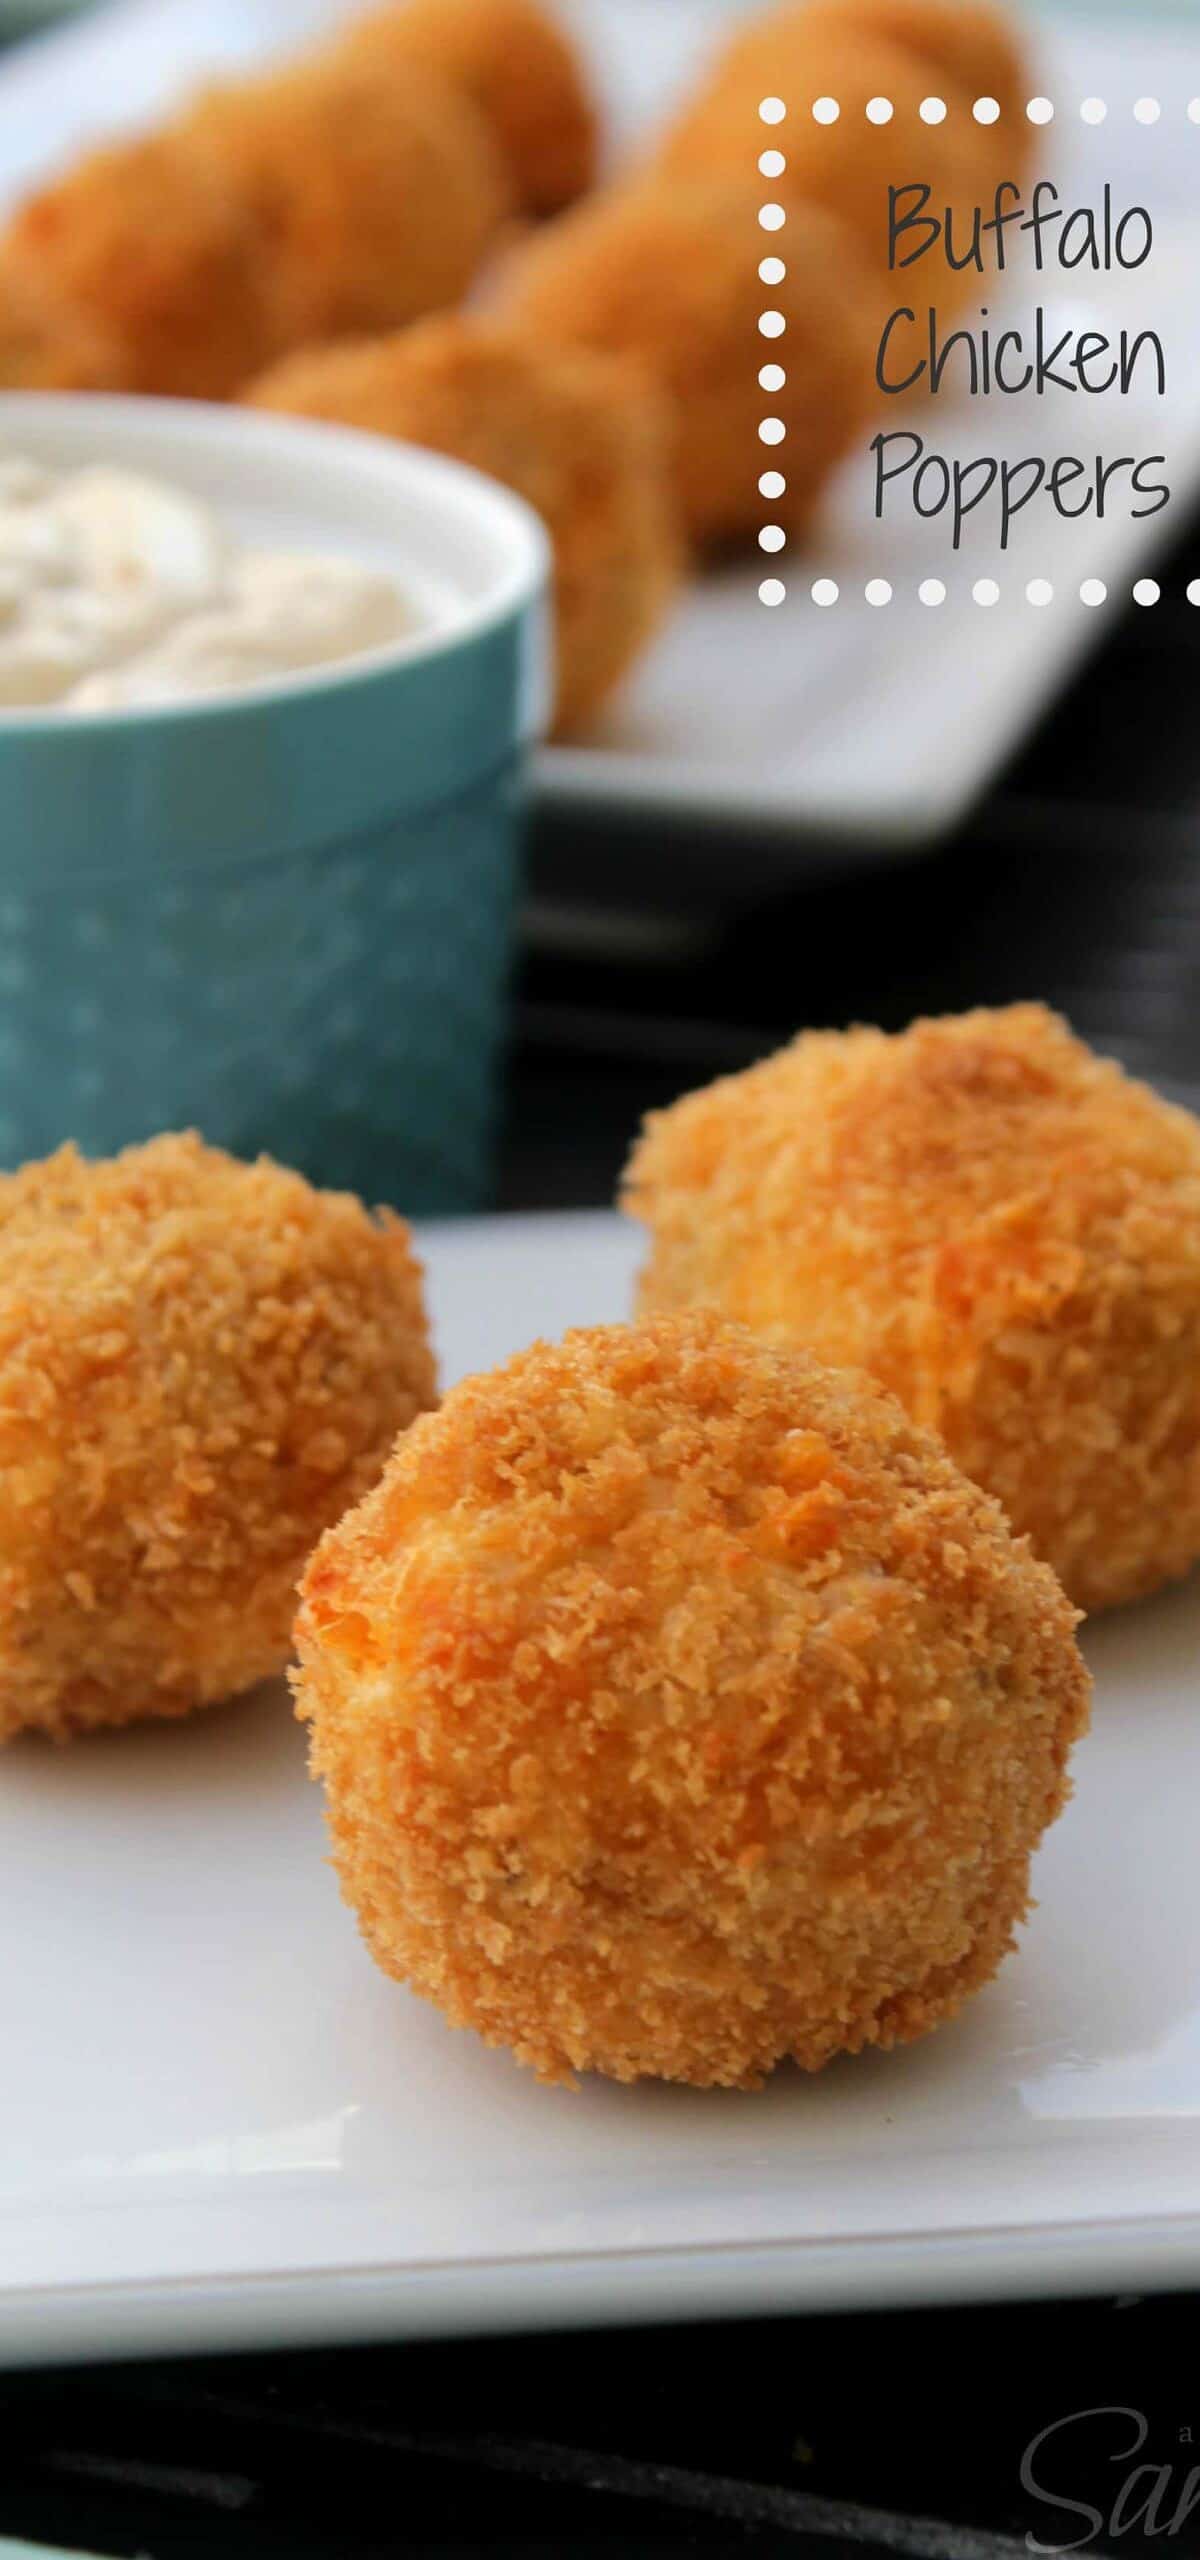  The ideal appetizer for any occasion, these chicken poppers are easy to make and even easier to love.